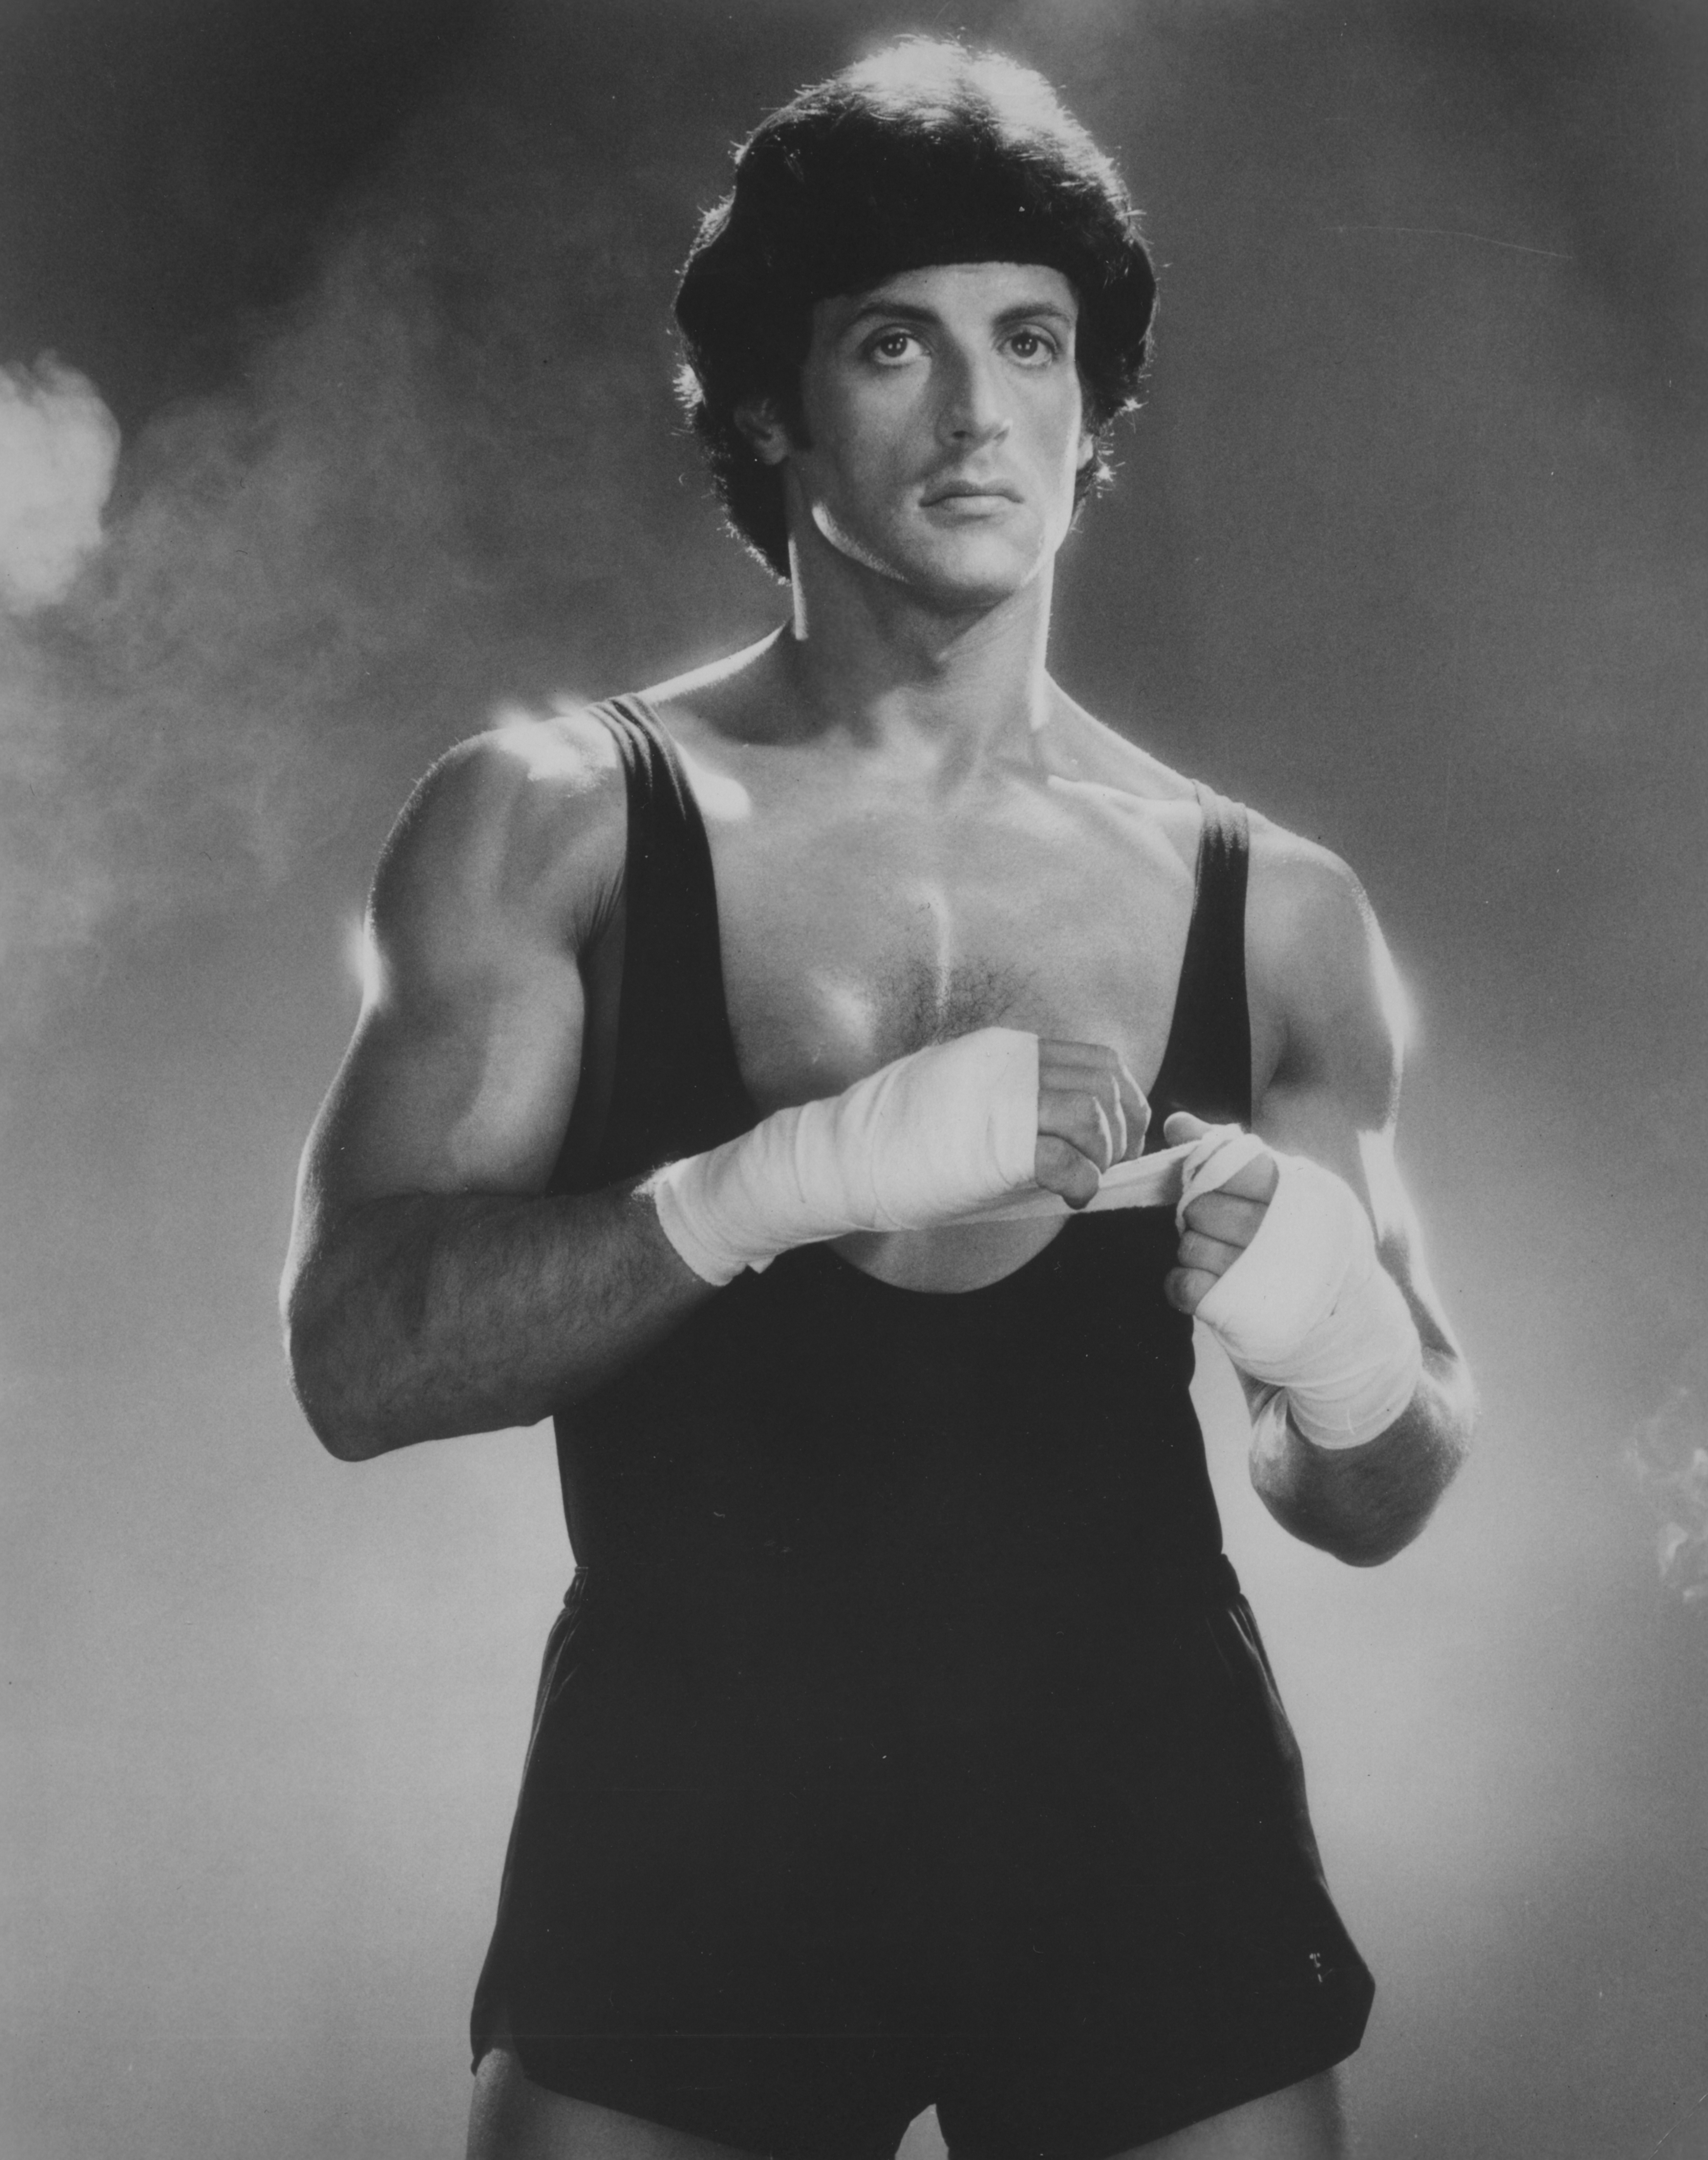 Sylvester Stallone in a vest and shorts while posing for a boxing shot circa 1970 | Source: Getty Images